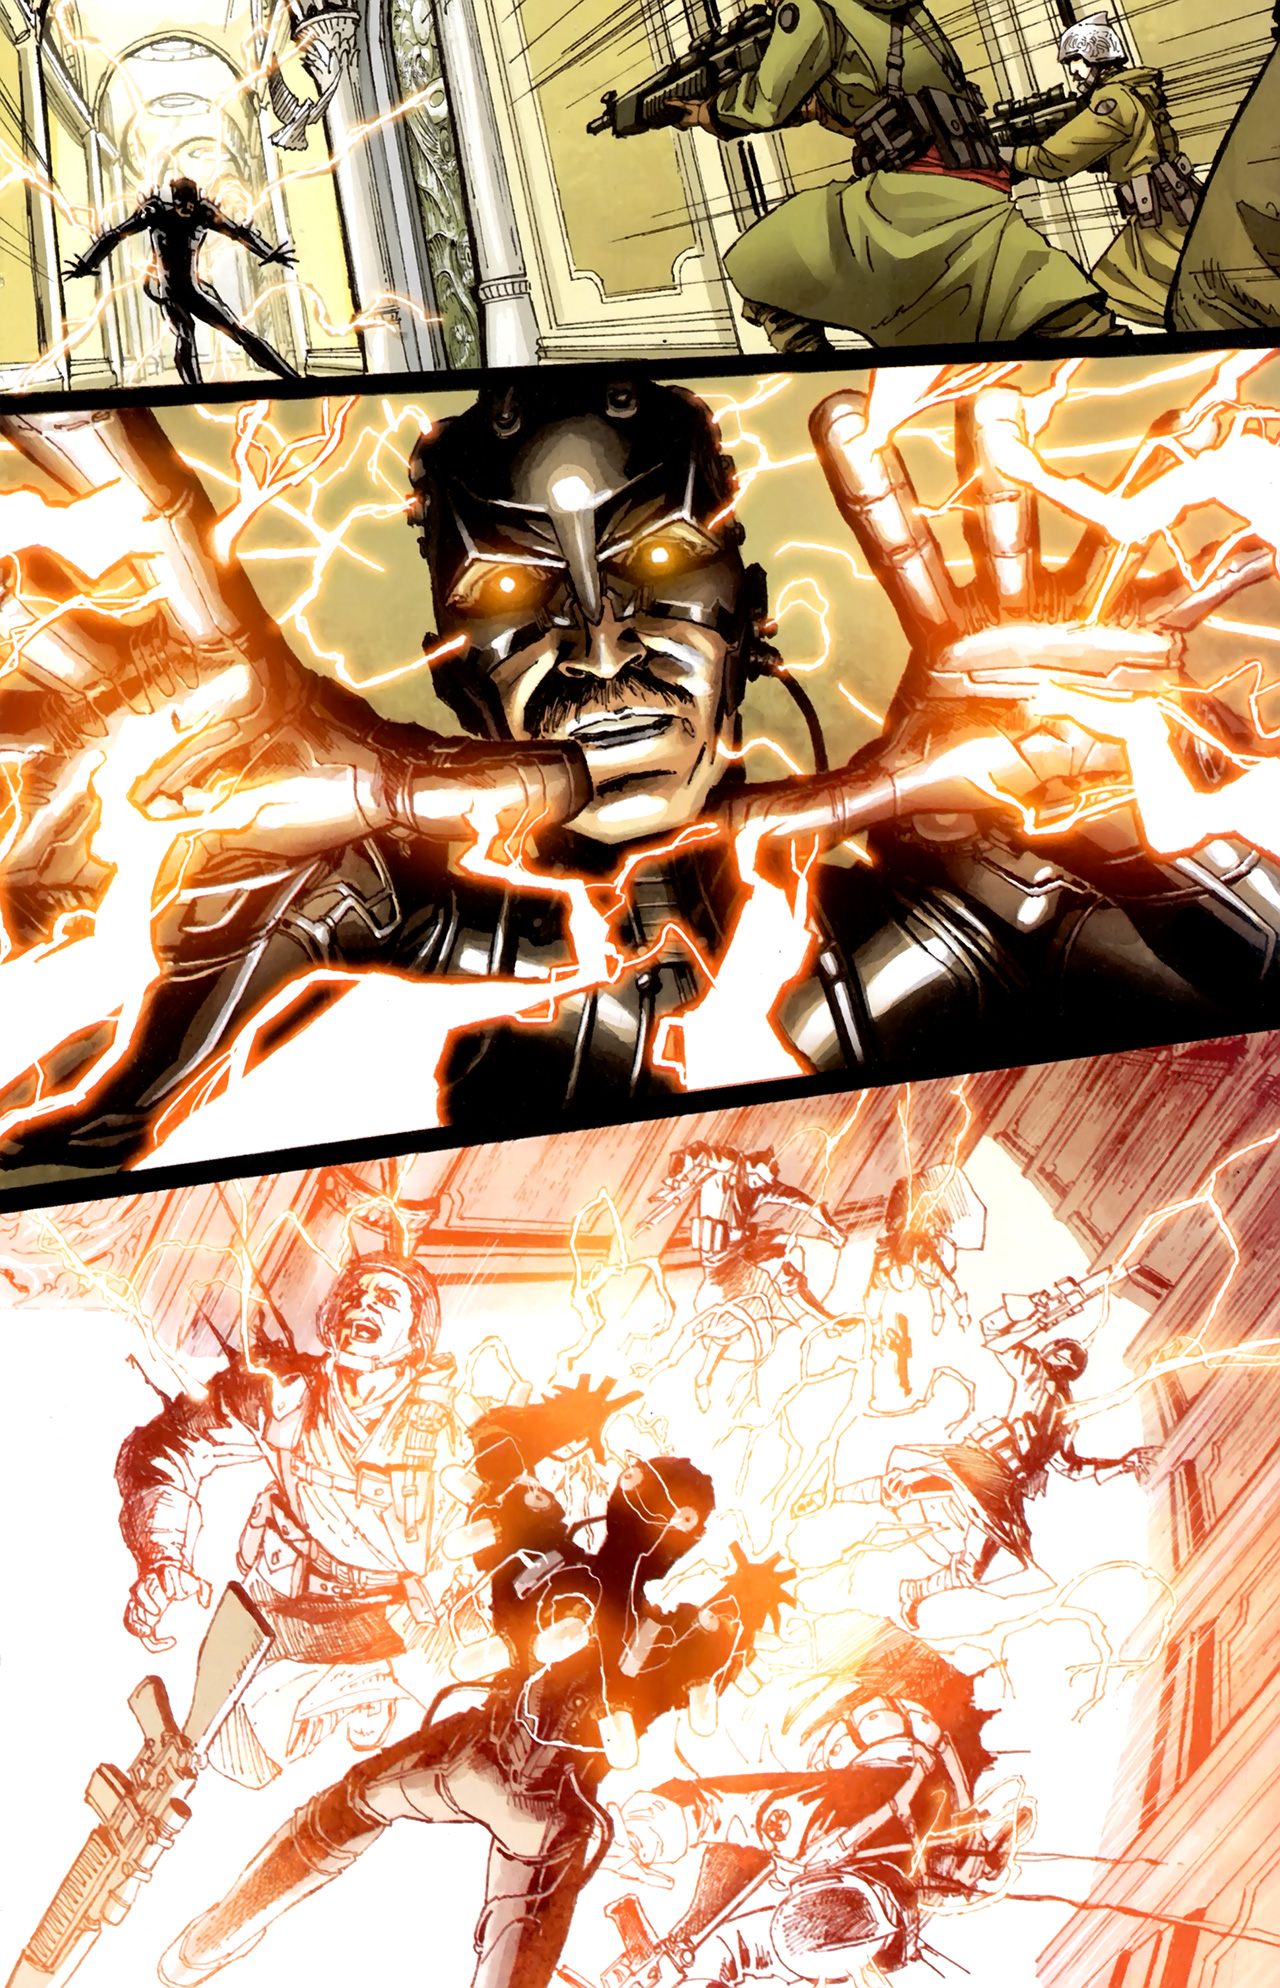 S.H.I.E.L.D. (2010) Issue #1 #2 - English 29